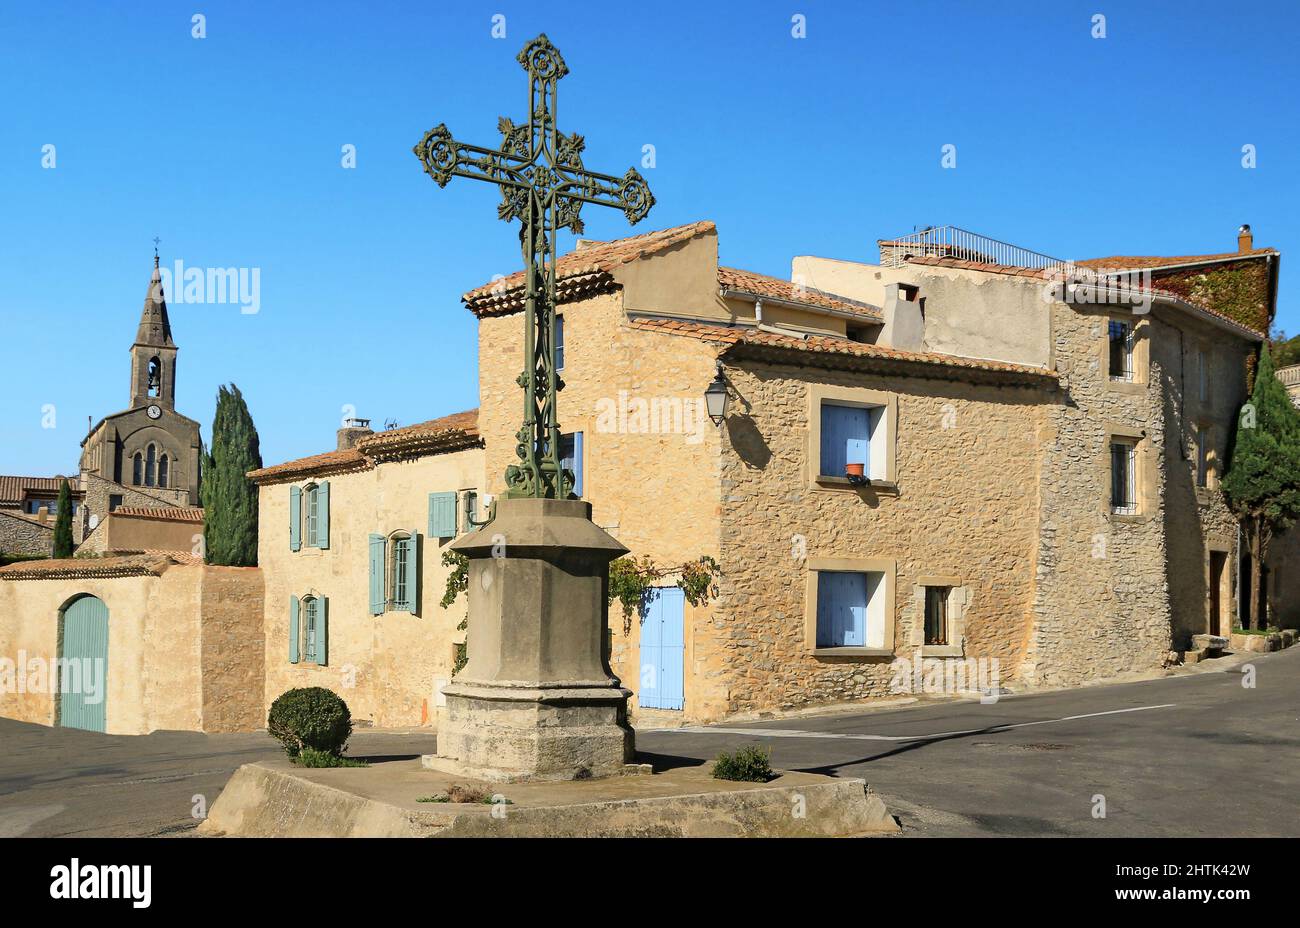 Monumental cross on the square of a Provençal village. Stock Photo